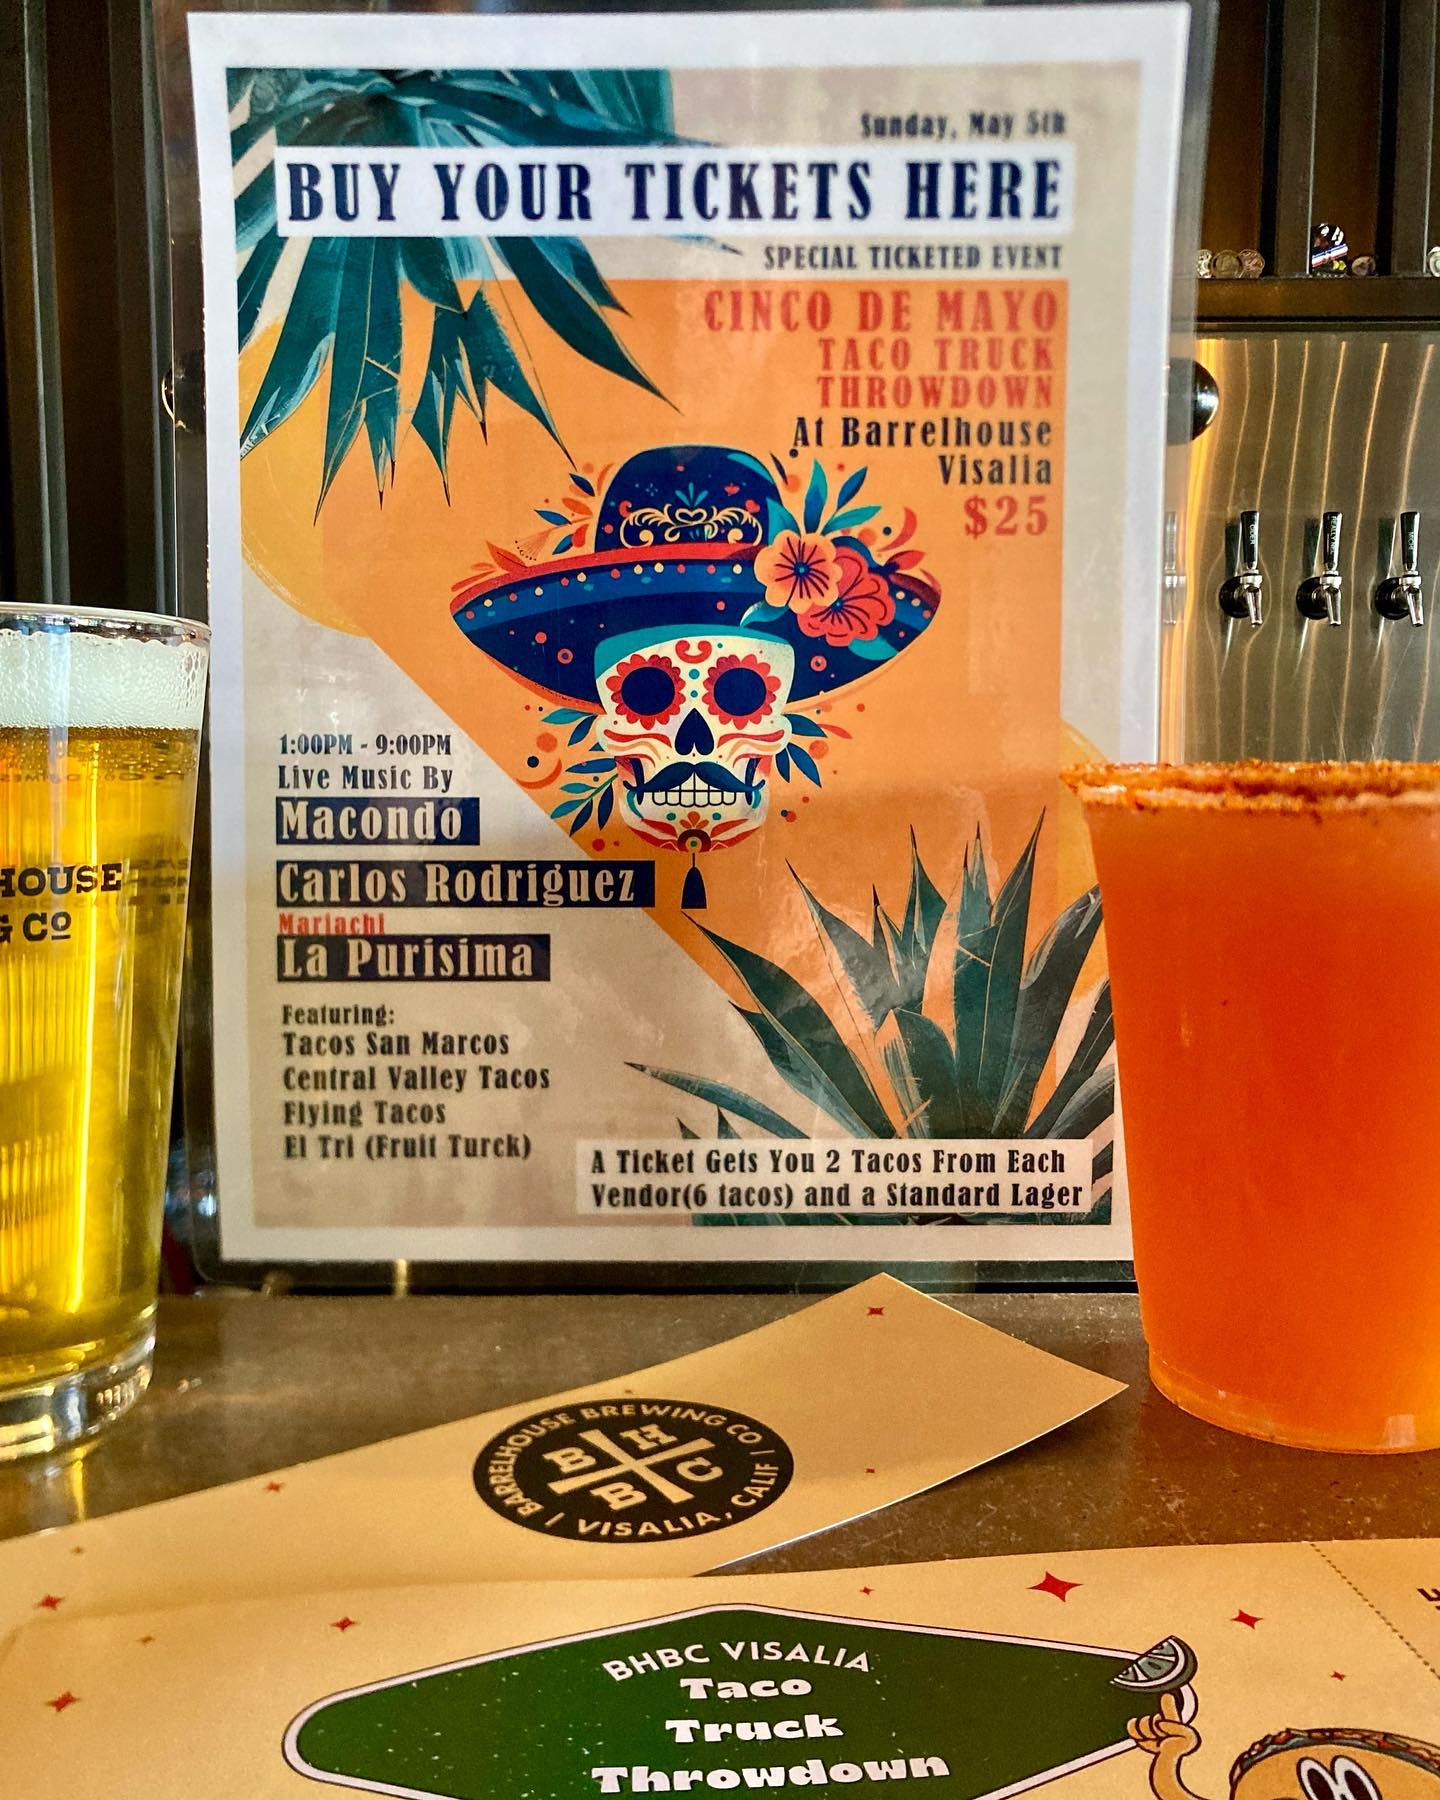 This Sunday we have Cinco De Mayo covered, featuring our first ever Taco Truck Throw down! Including live music and a raffle.
Tickets are still available and include 6 free Tacos and a crisp Standard Lager to wash it all down. Don&rsquo;t miss out an